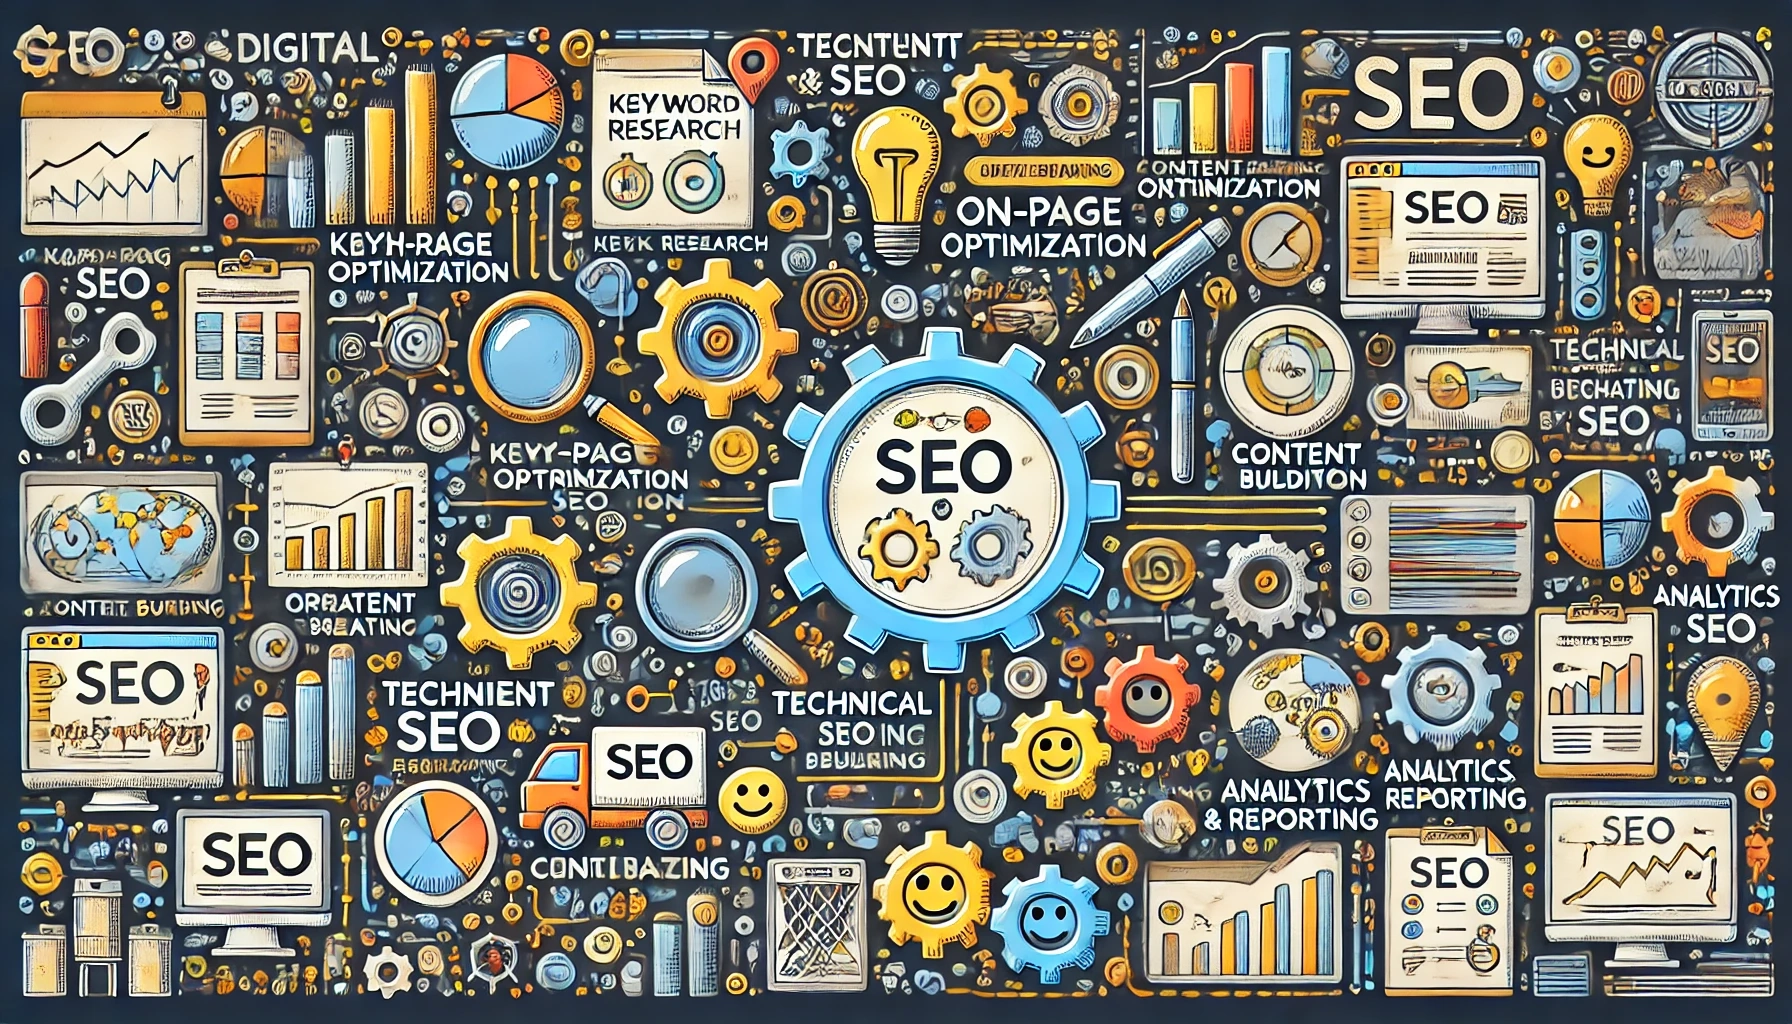 SEO Marketing Strategy: 8 Components of a Successful SEO Strategy